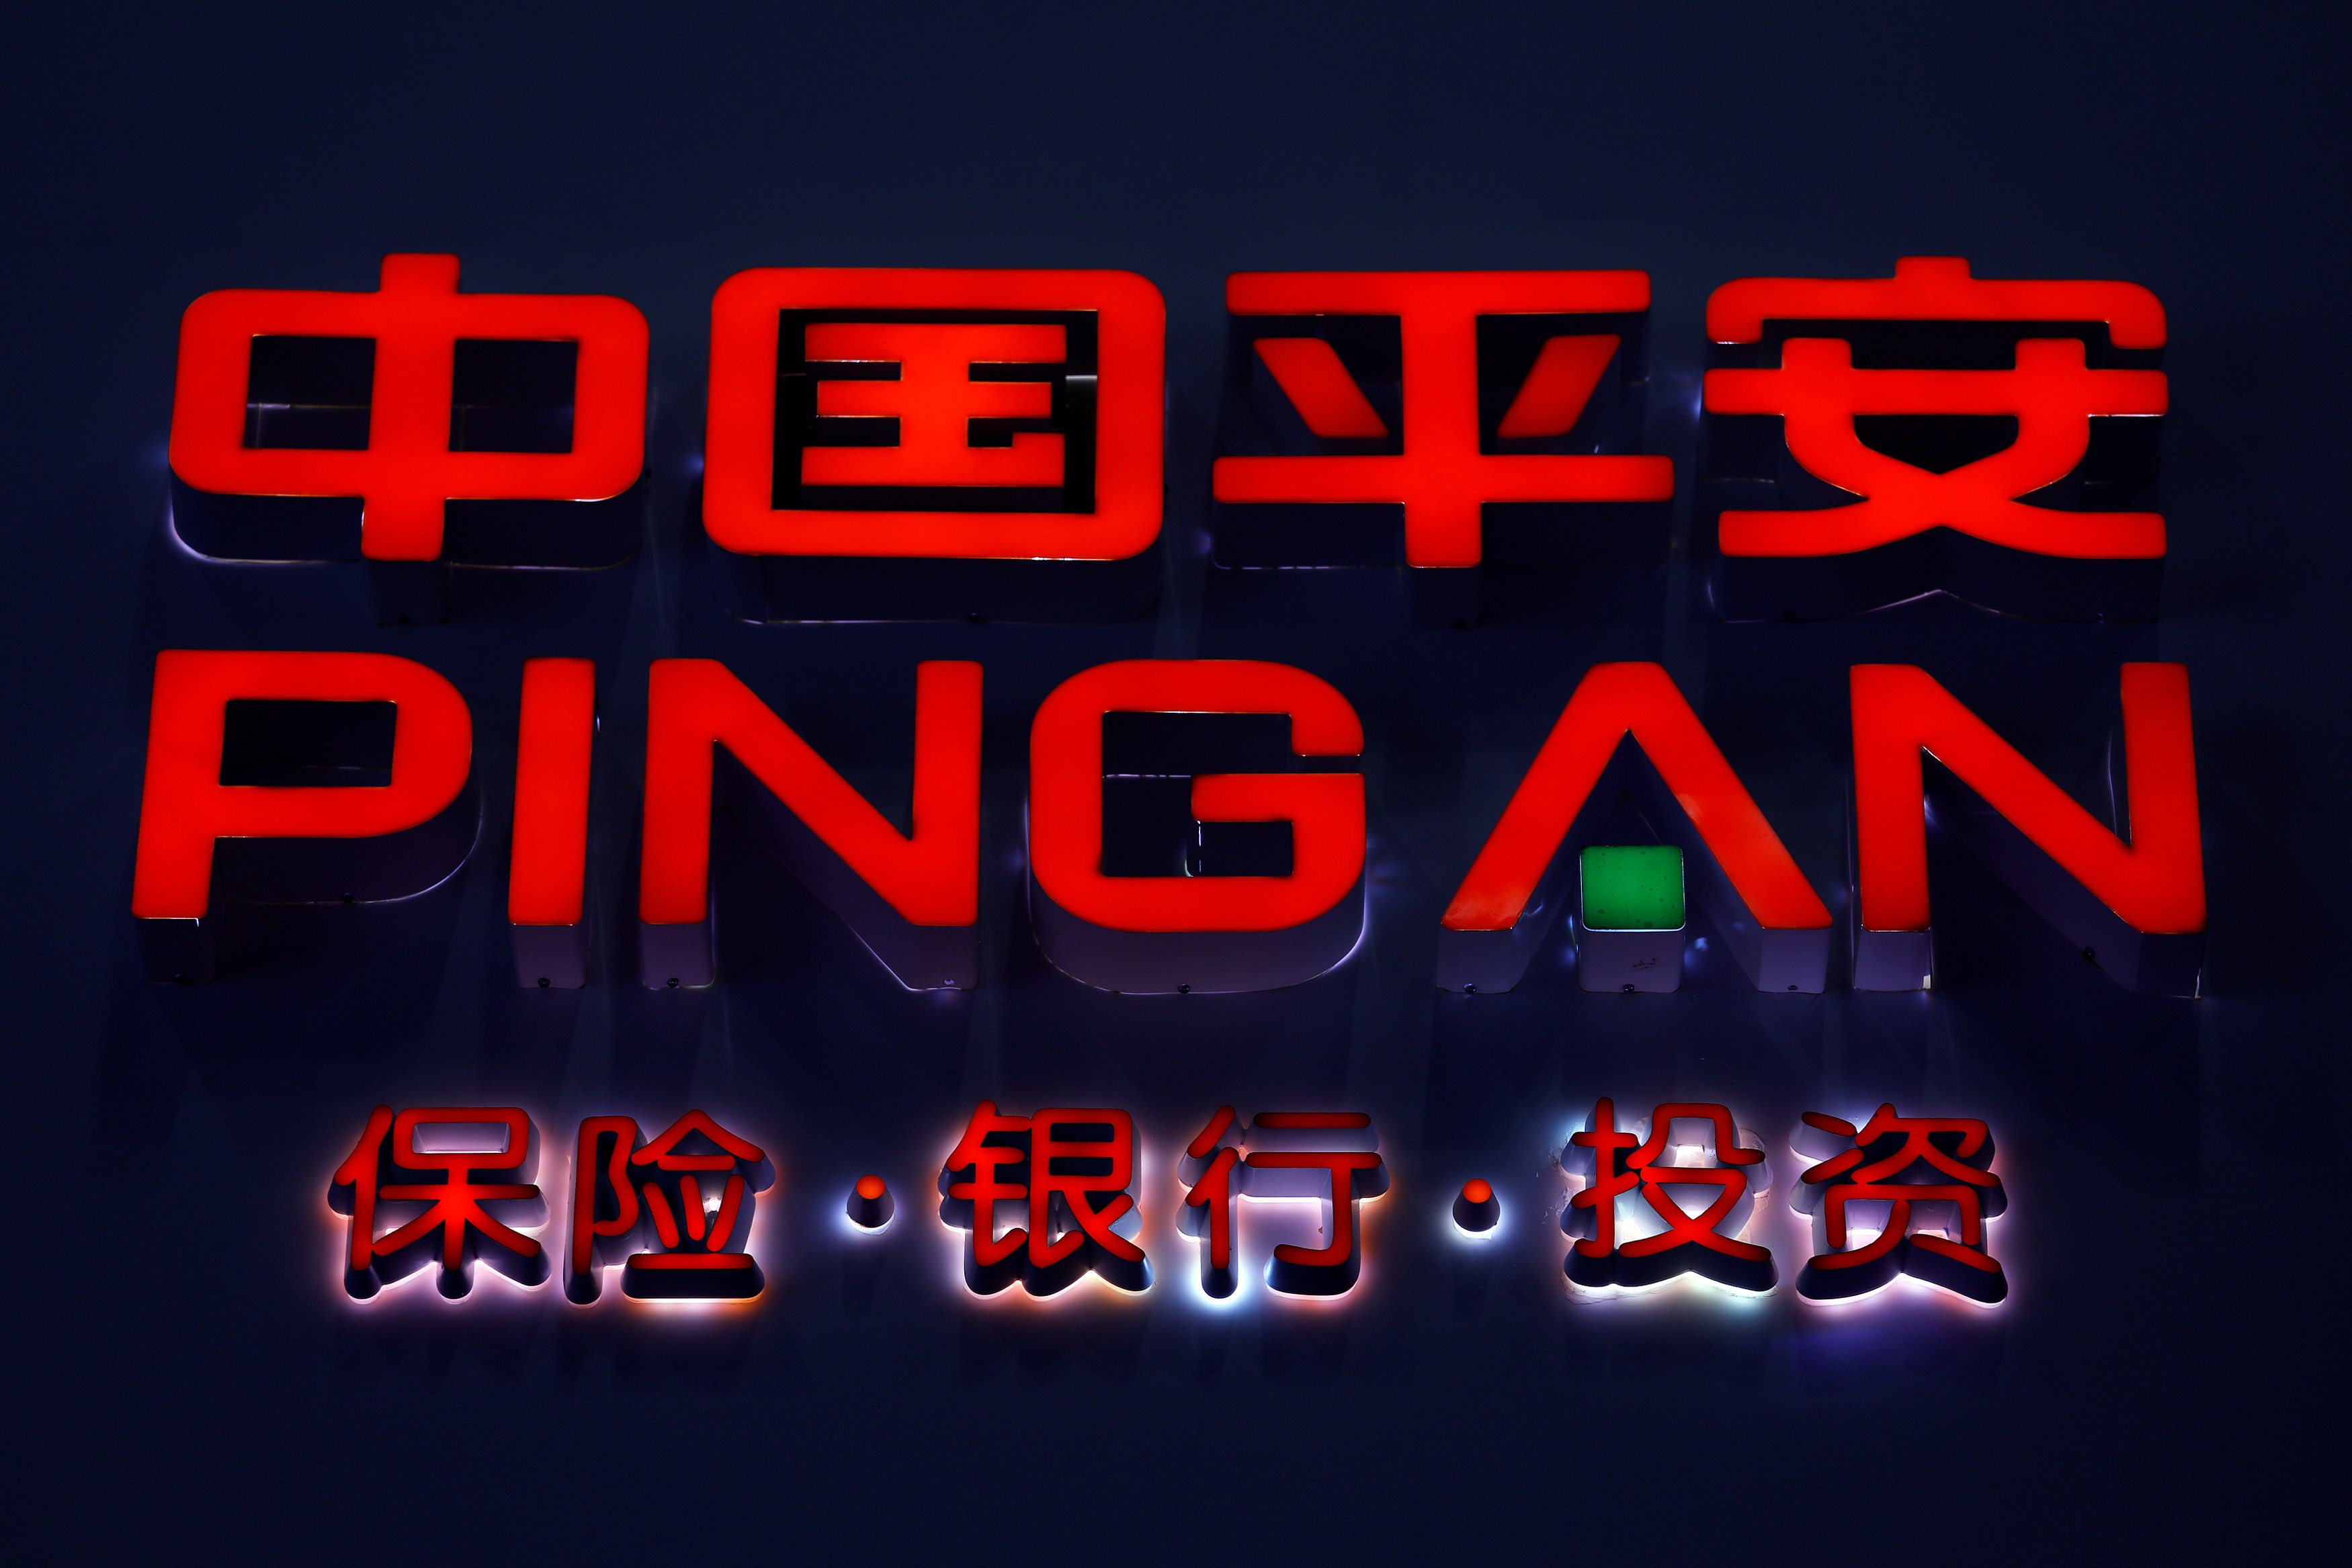 Ping An started developing Ping An Cloud in 2013 to power its own technology ambitions. Photo: Reuters